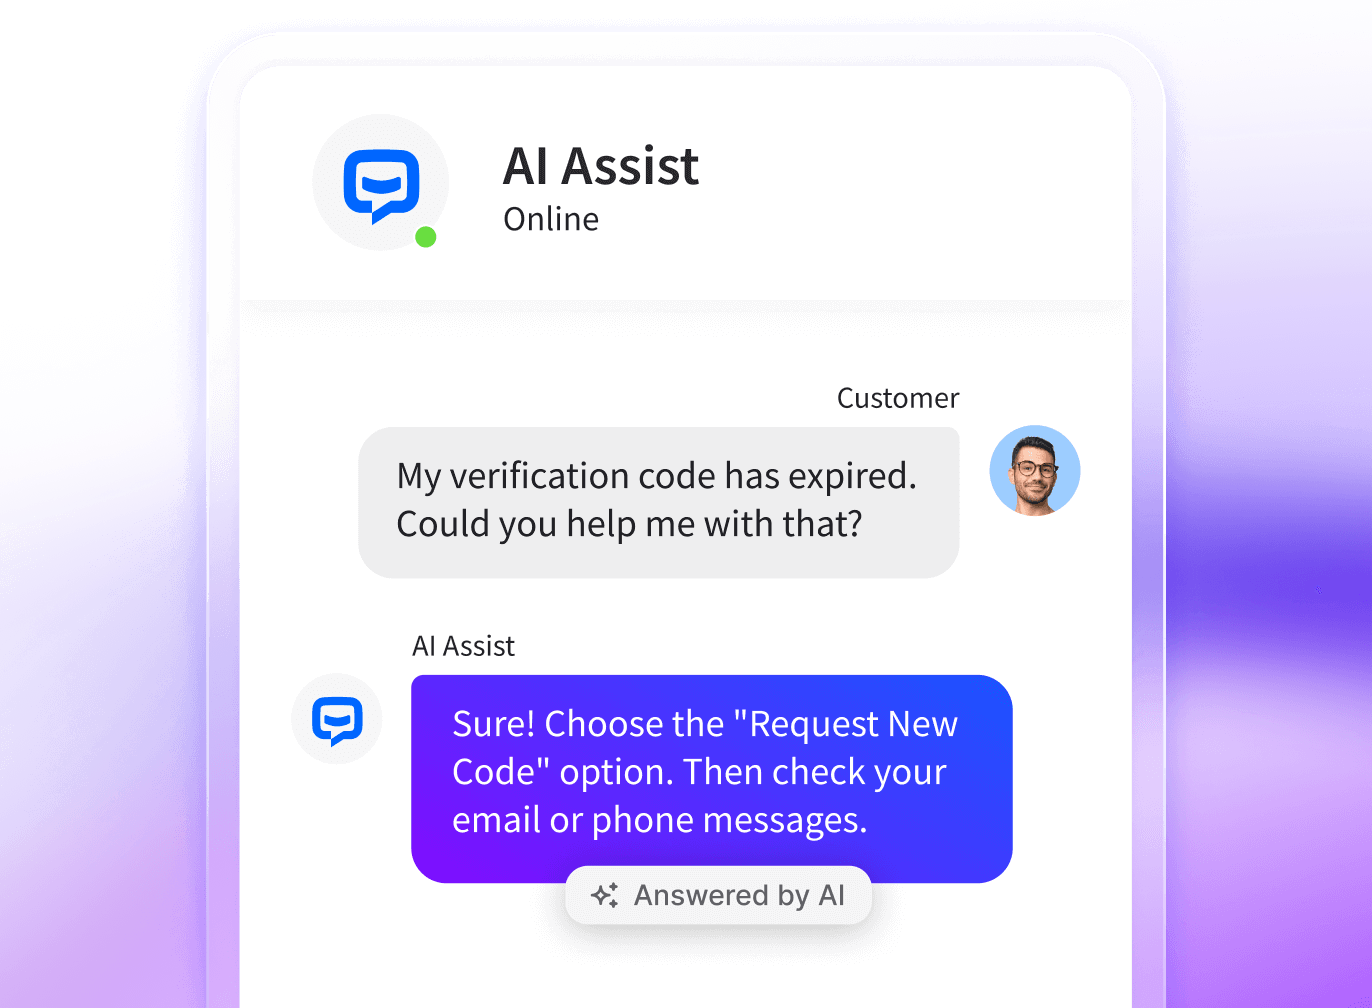 Chatbot widget powered by AI Assist feature, showing a conversation between a customer and an AI bot where the customer requests a new verification code.